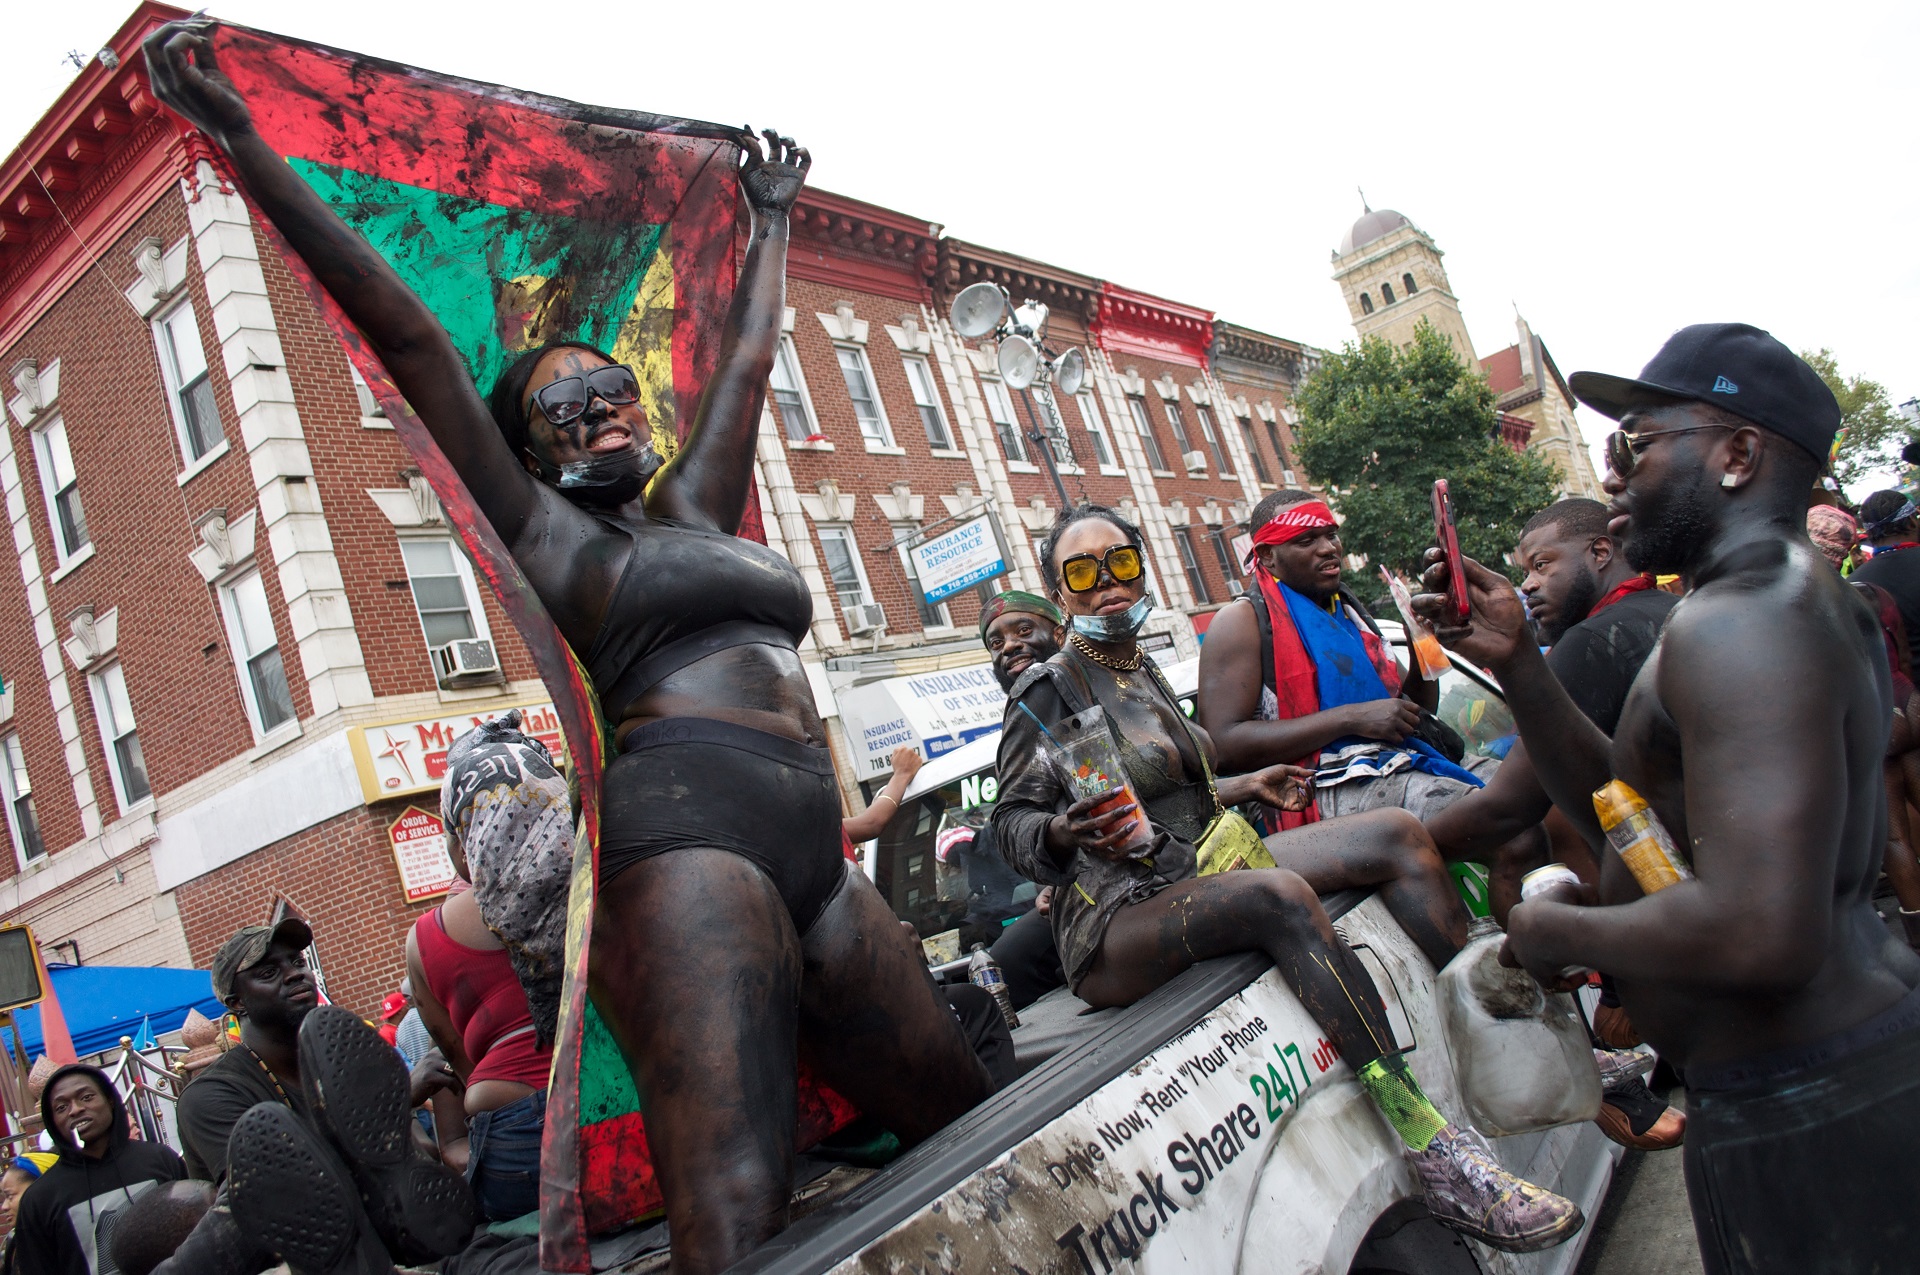 A woman dances in the back of a truck while holding the flag of Grenada on Nostrand Avenue.